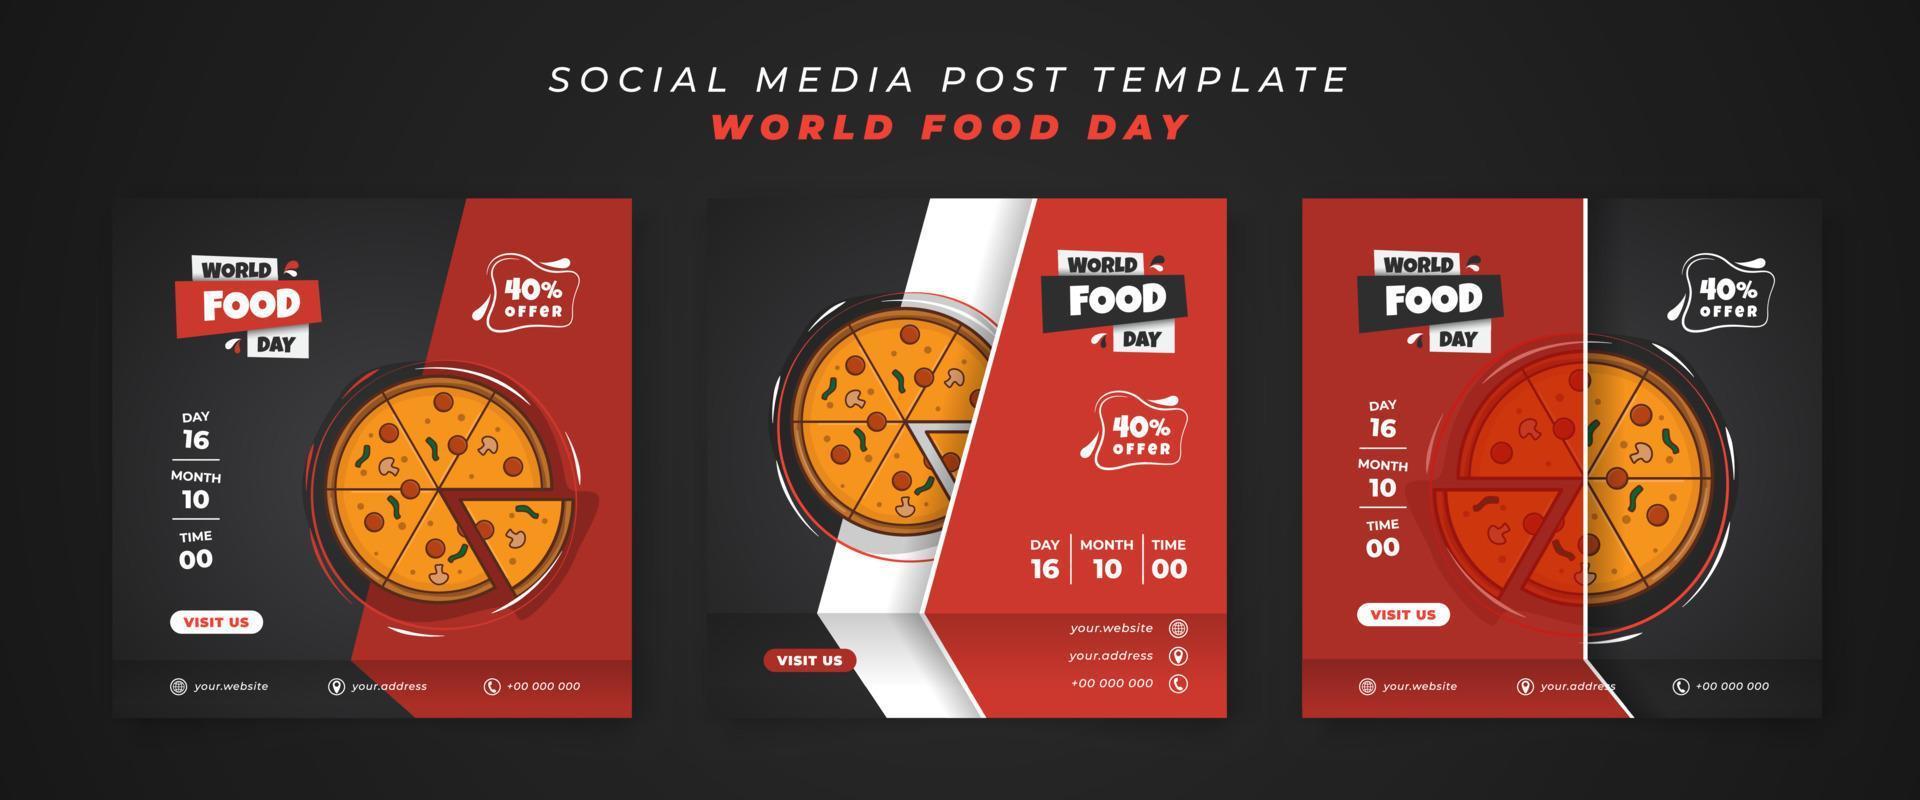 Set of social media post template with sliced pizza in cartoon illustration and red black background vector